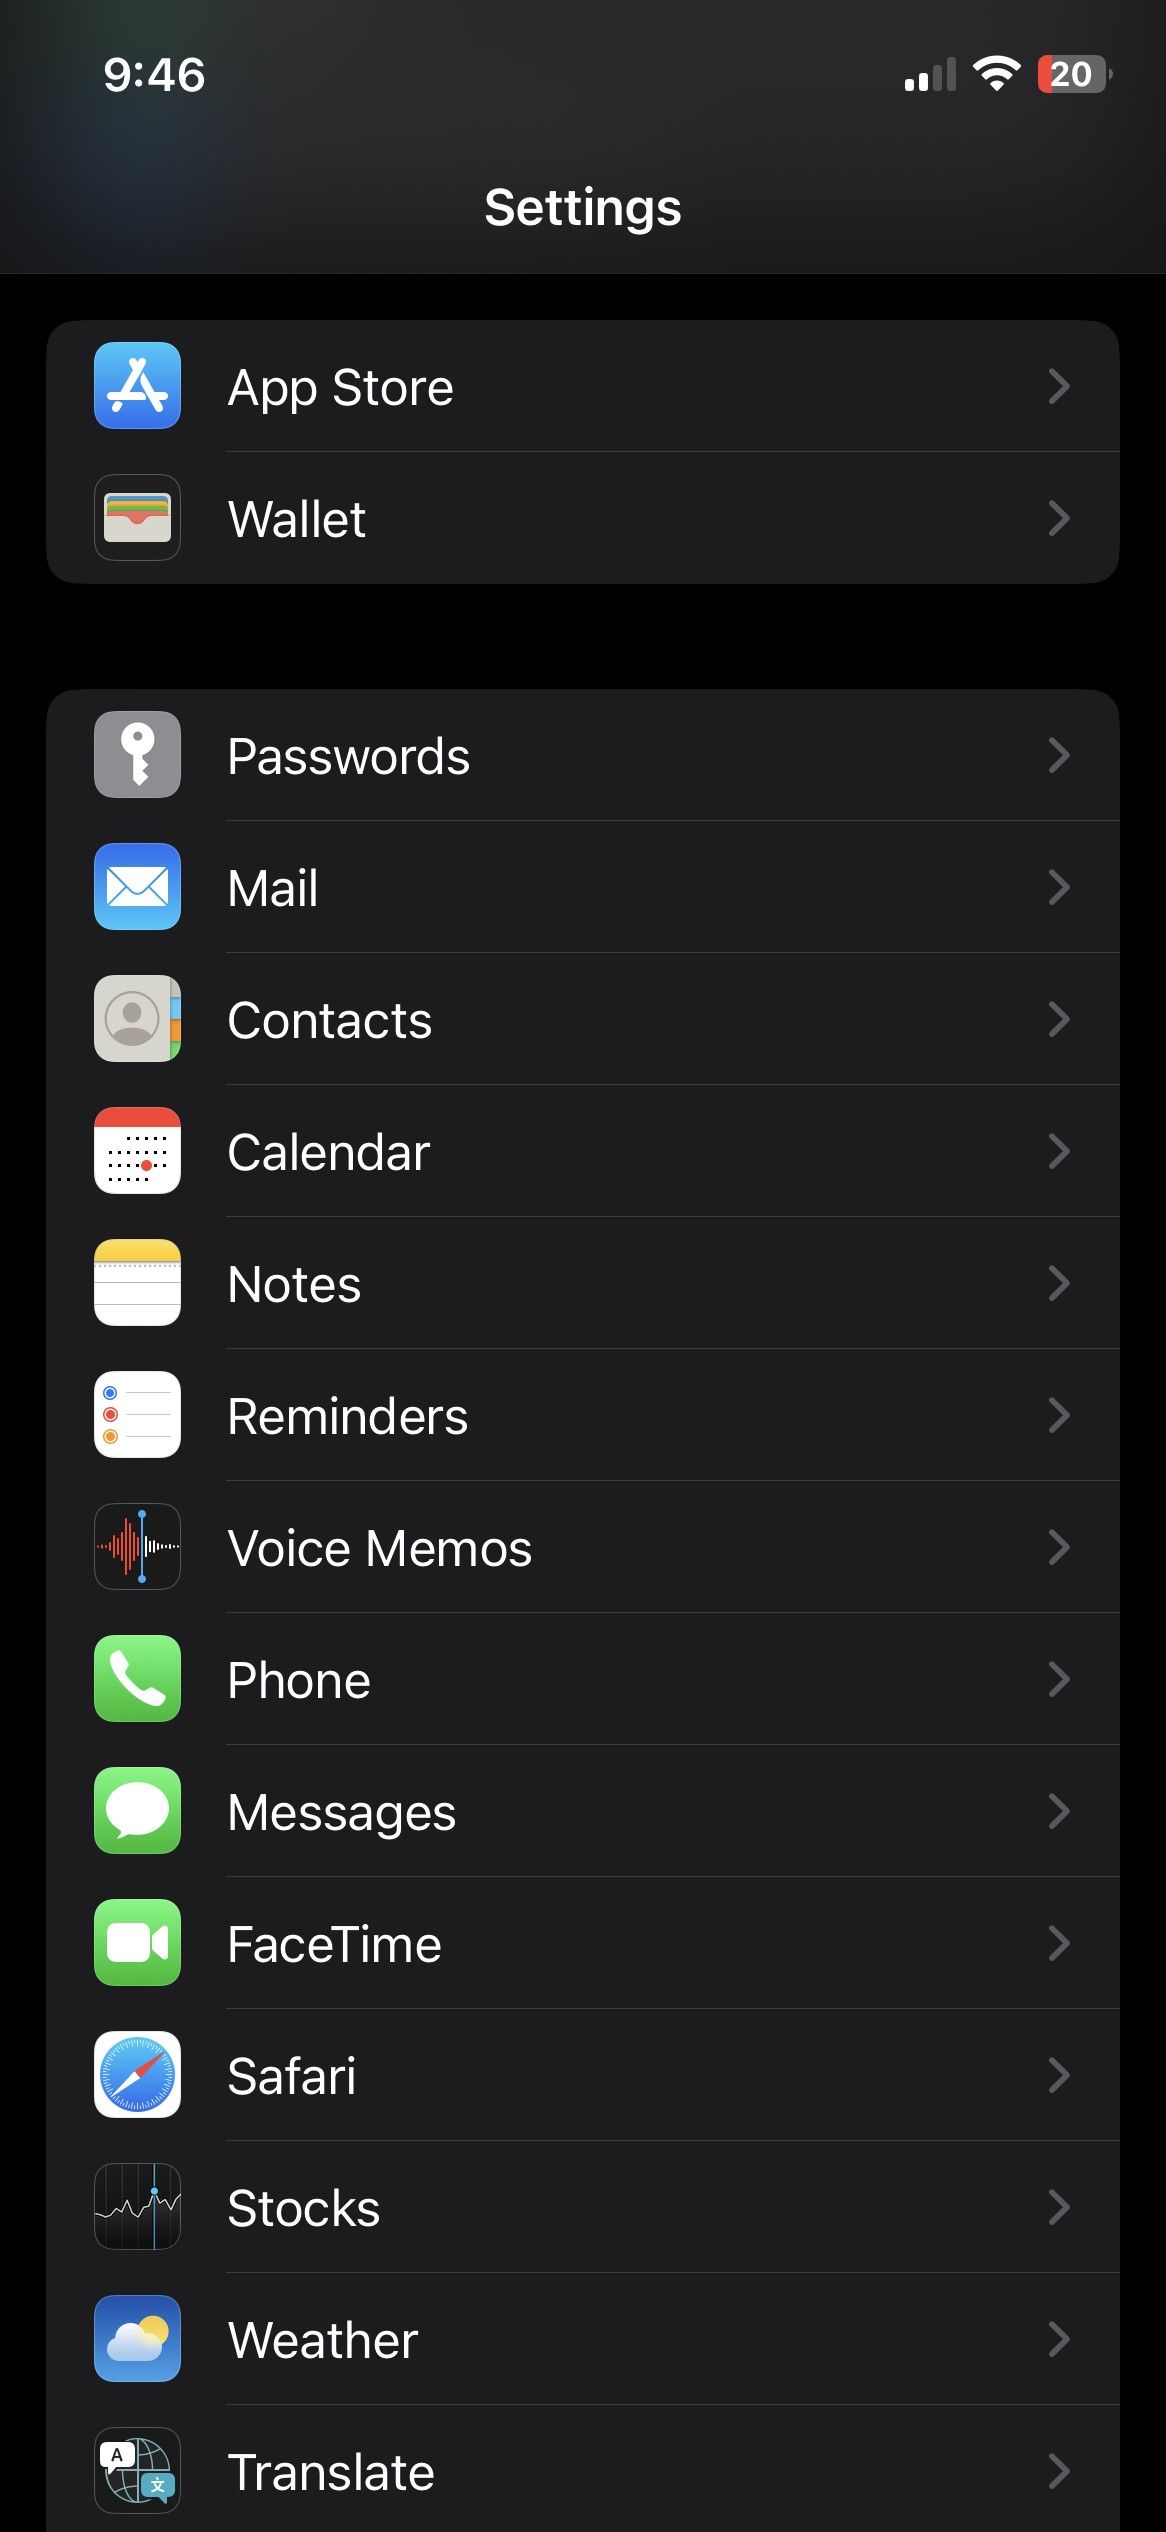 Screenshot in iPhone's Settings App with its list of sections